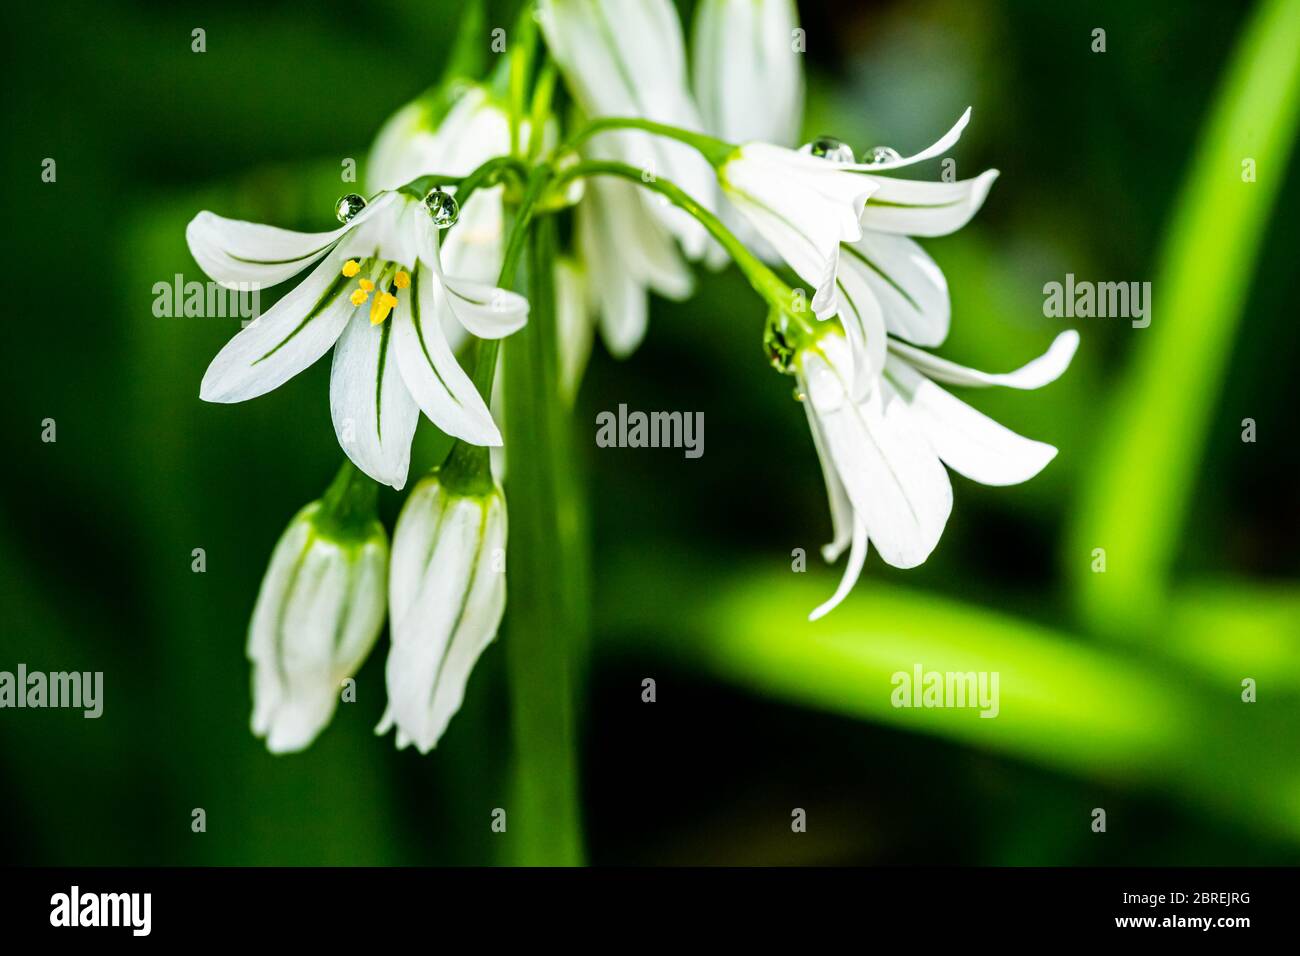 Macrophotograph of head of white spanish bluebells with dew drops on green background Stock Photo